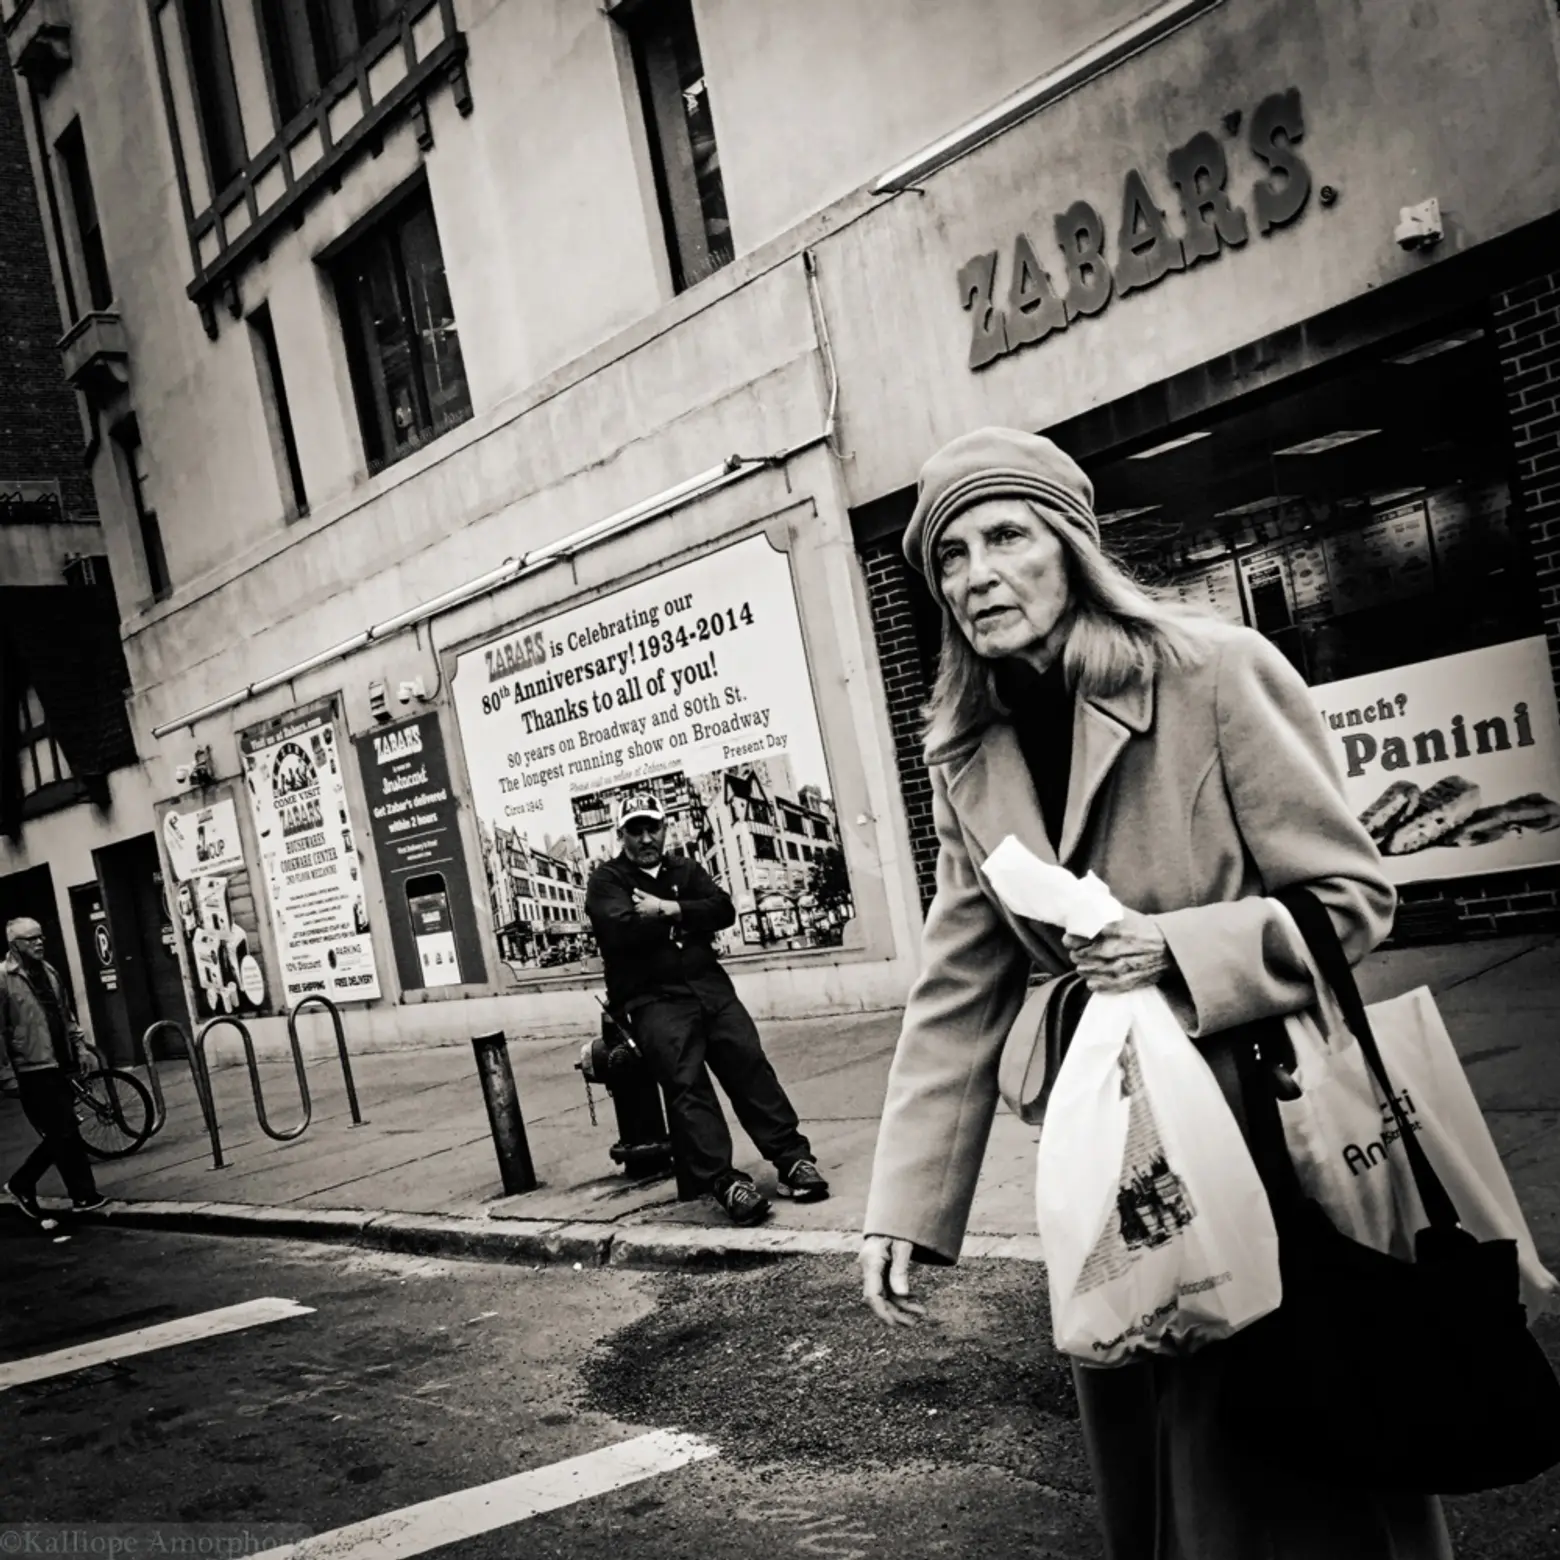 The Urban Lens: Kalliope Amorphous captures the faces of the Upper West Side